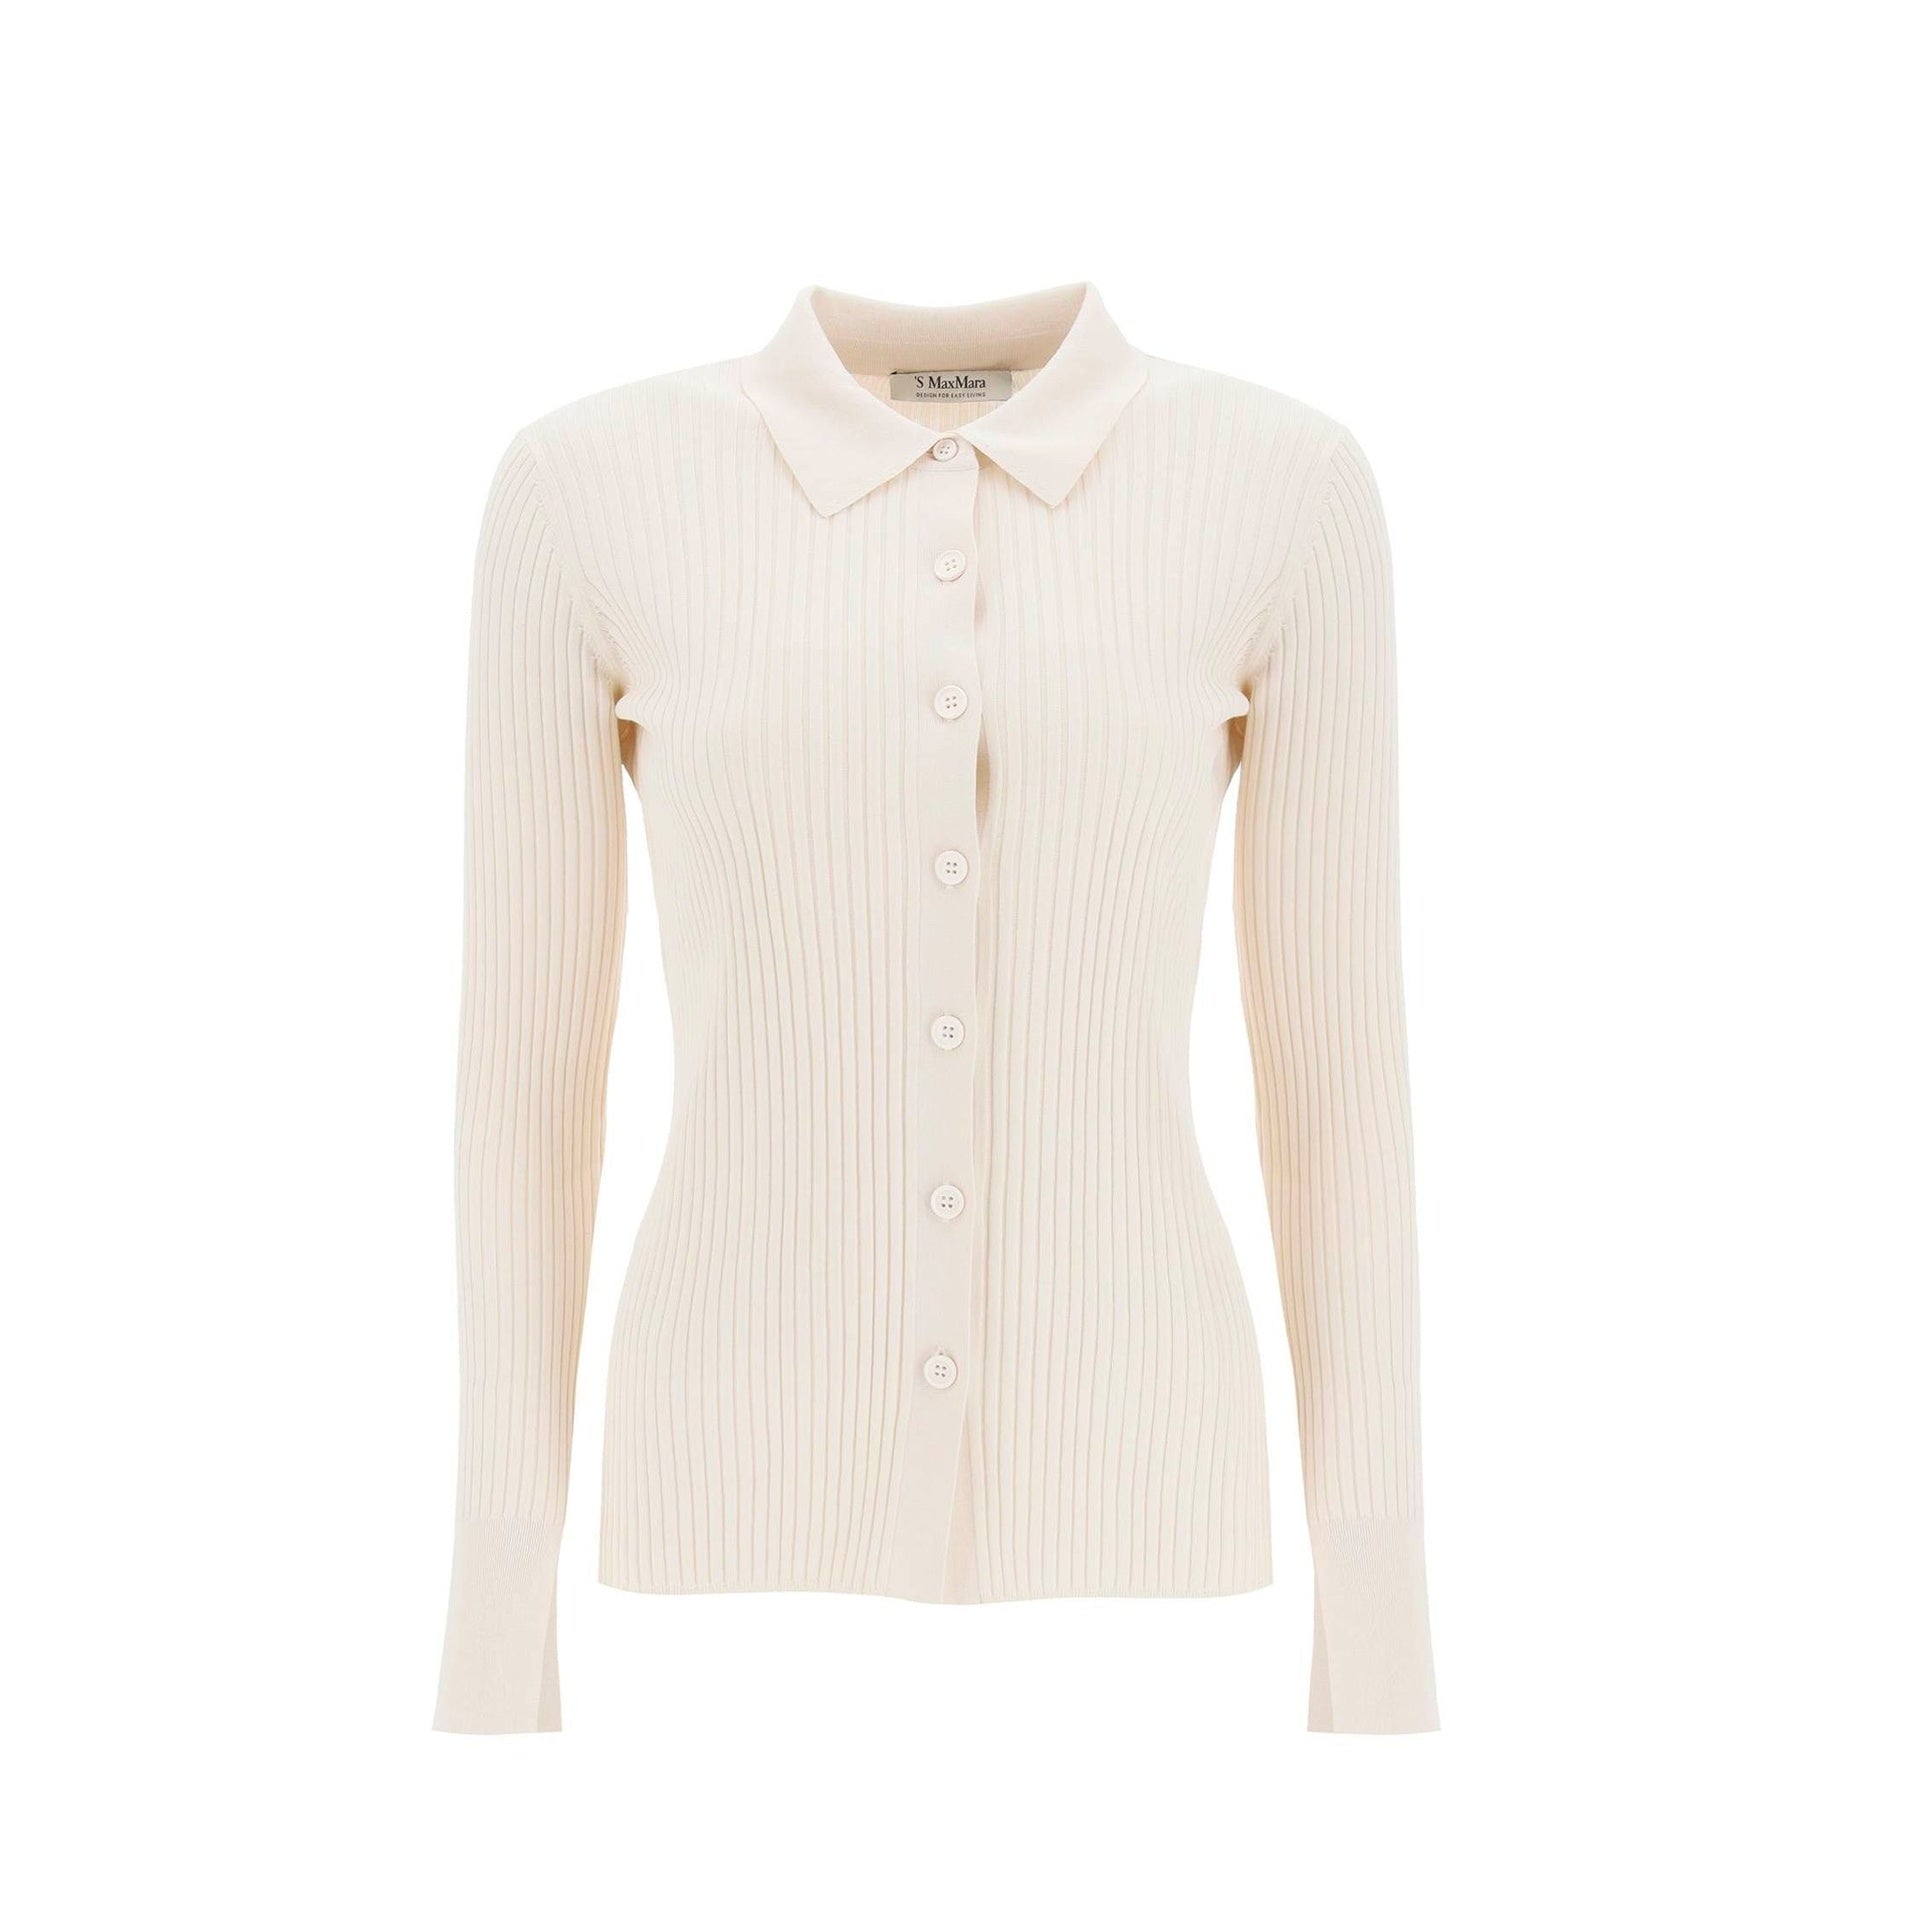 S-MAX-MARA-OUTLET-SALE-s-Max-Mara-Tropea-Cardigan-Strick-BEIGE-L-ARCHIVE-COLLECTION.jpg